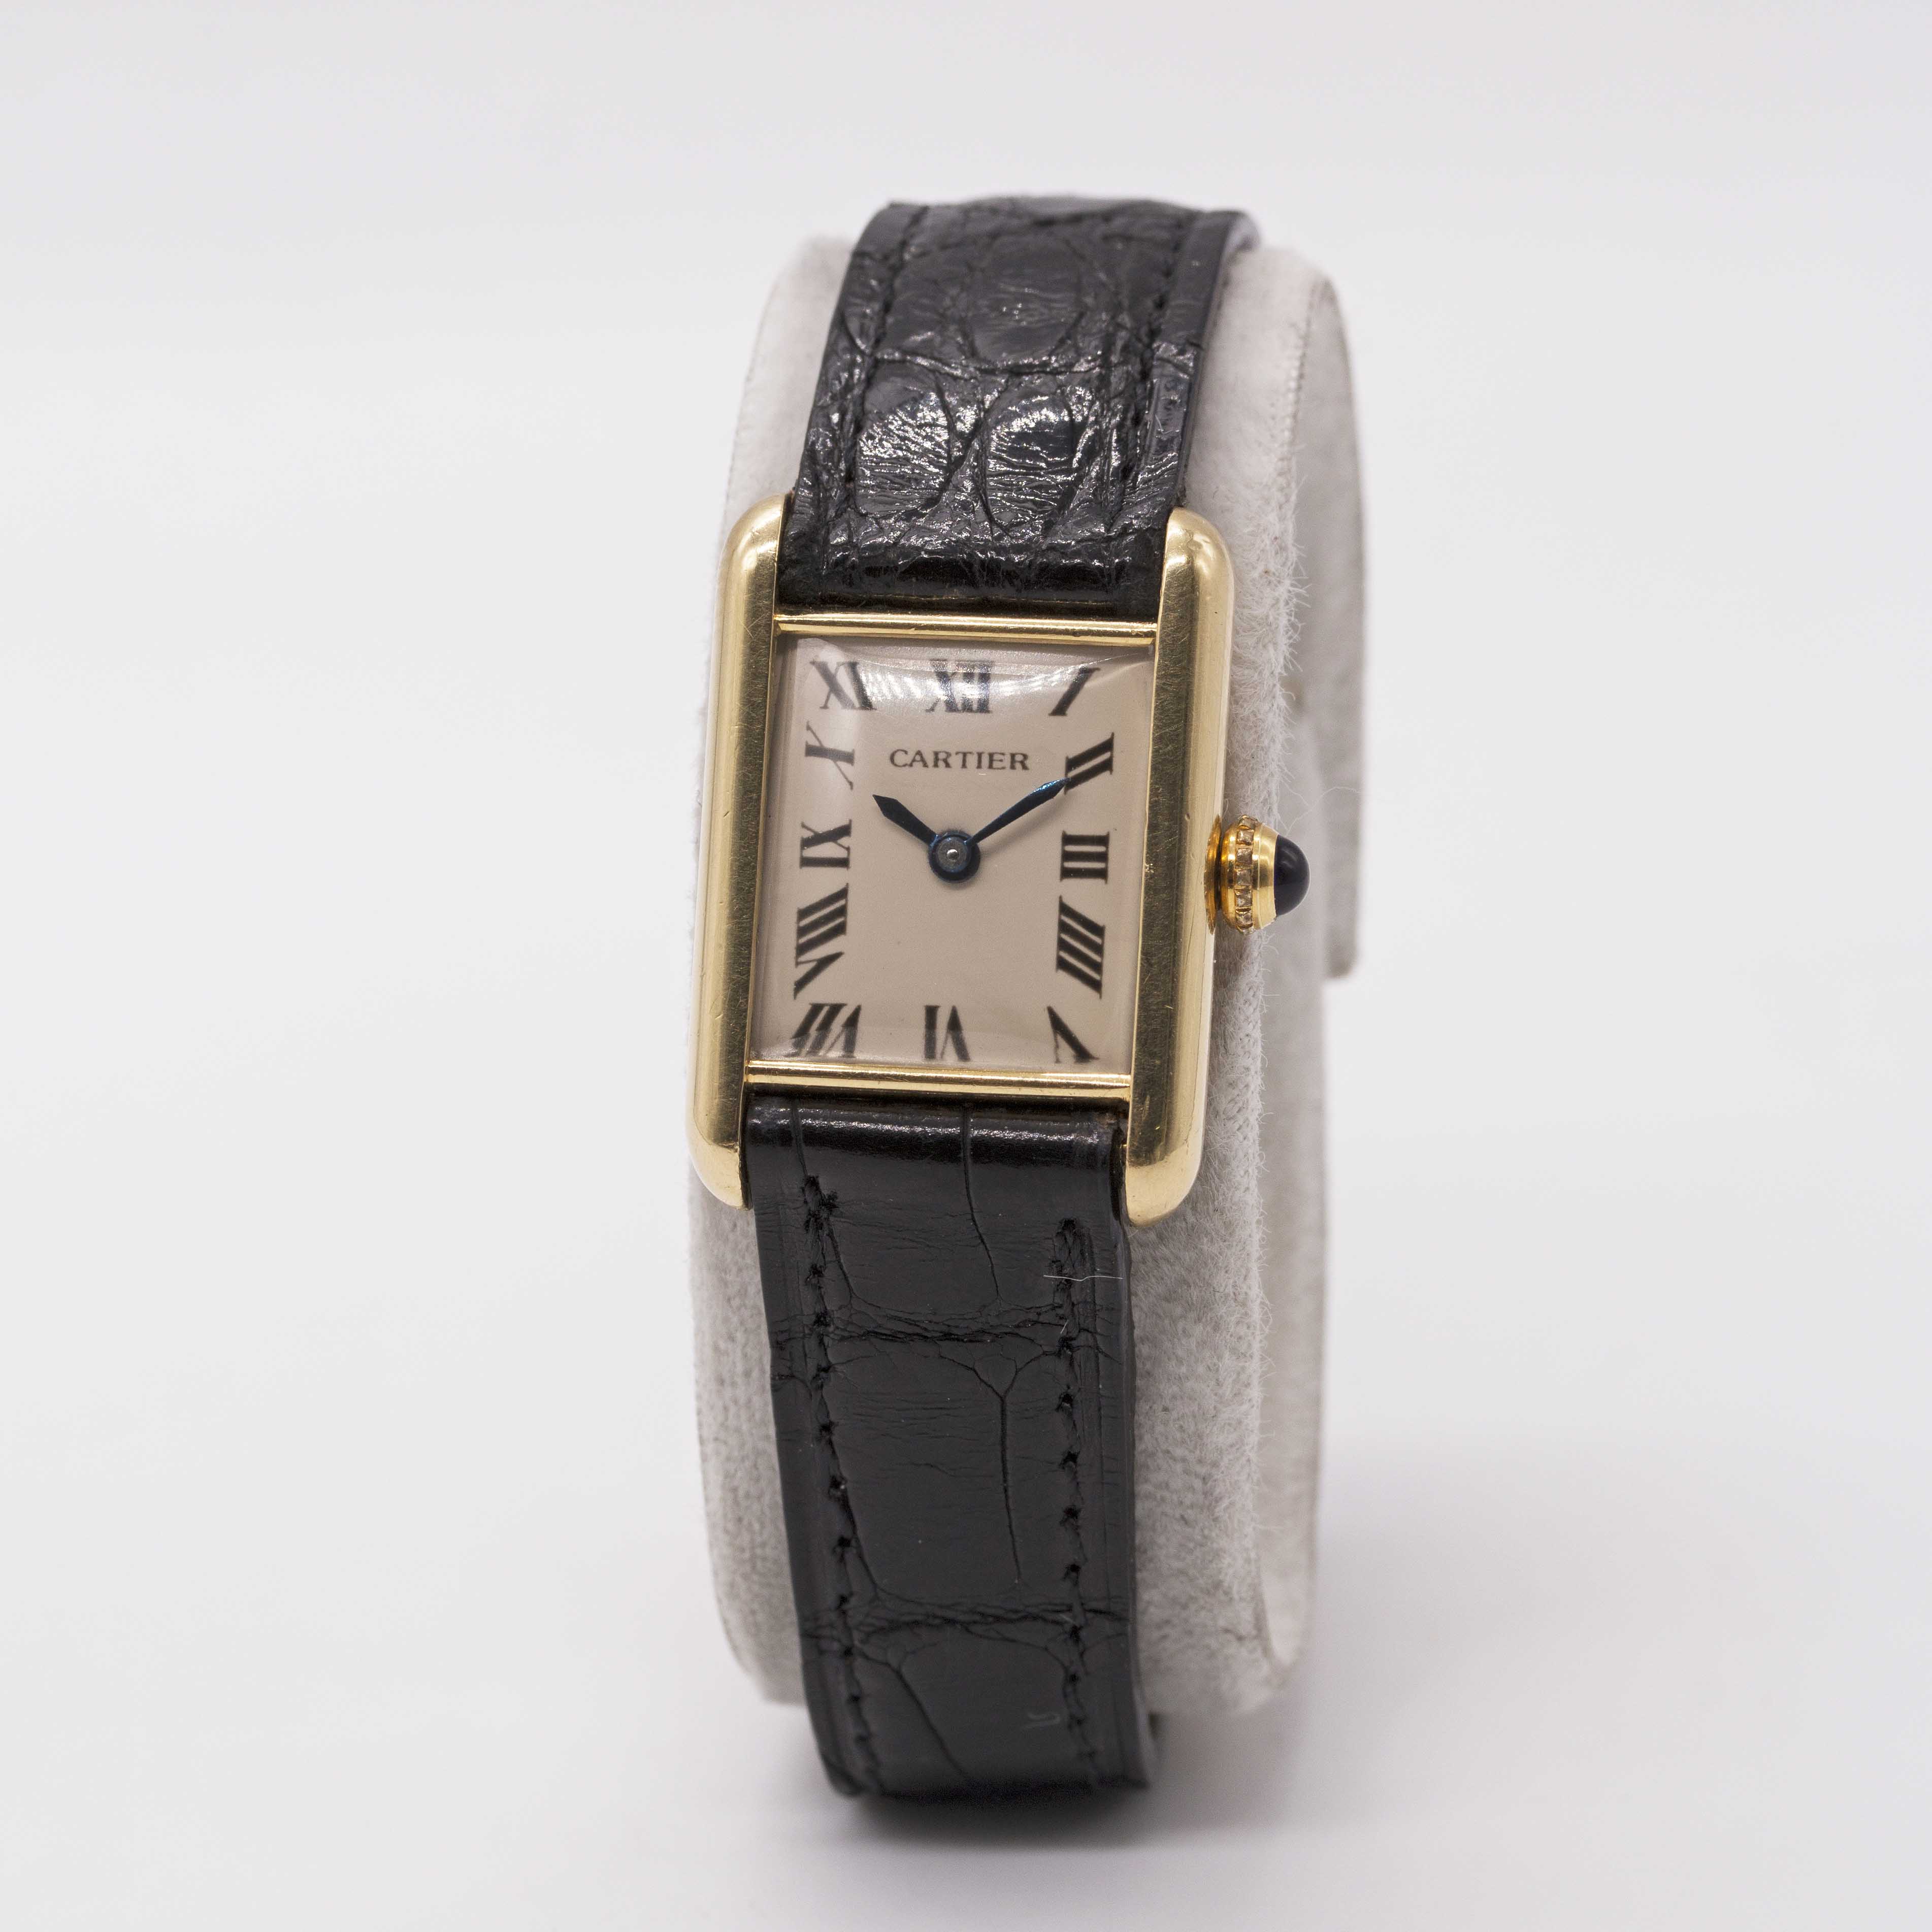 A RARE LADIES 18K SOLID GOLD CARTIER LONDON TANK 